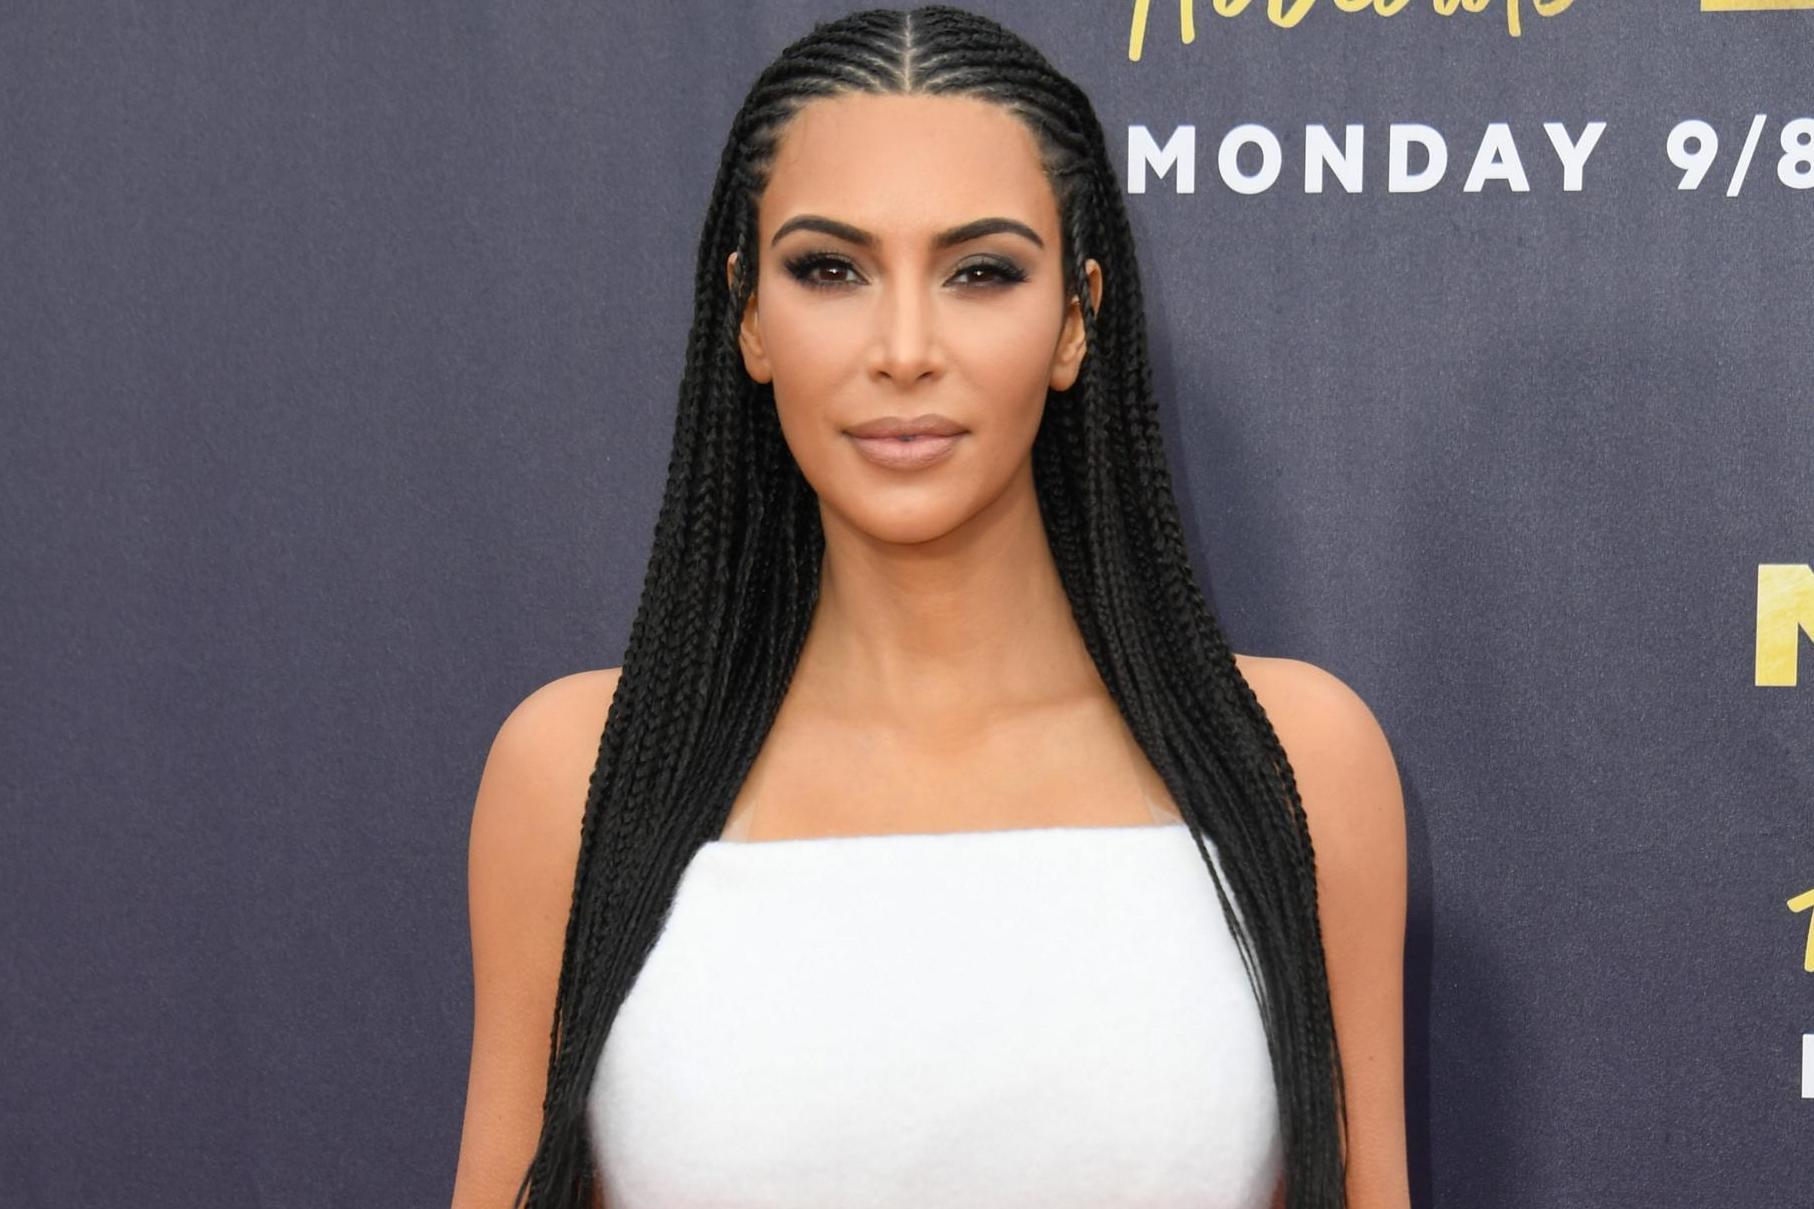 Kim Kardashian accused of cultural appropriation again after wearing braids  | The Independent | The Independent